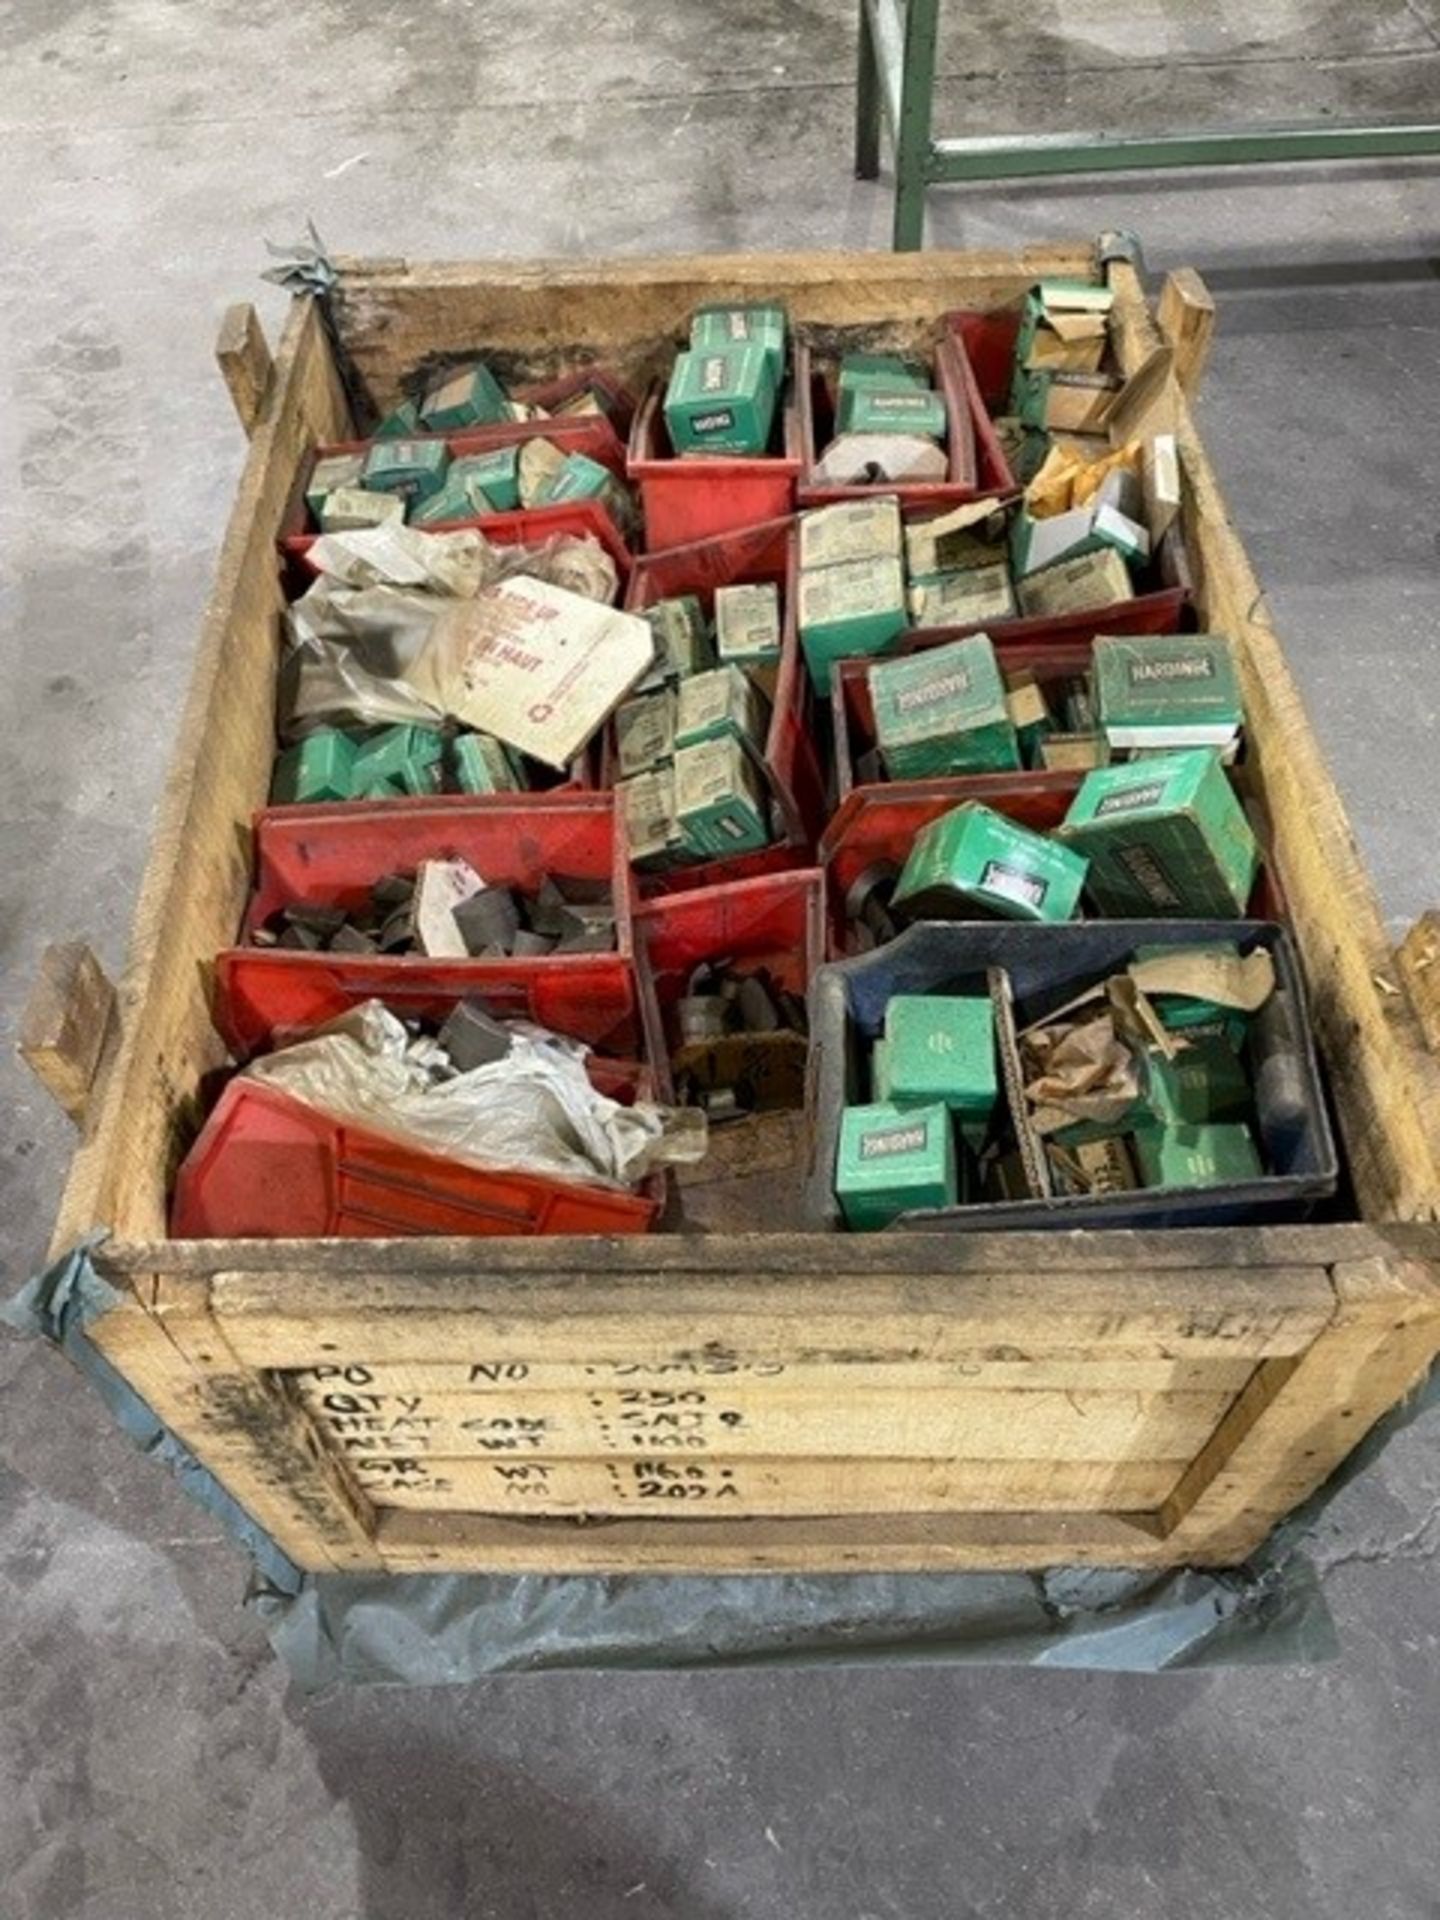 LOT CRATE WITH HARDINGE COLLET CHUCK JAWS